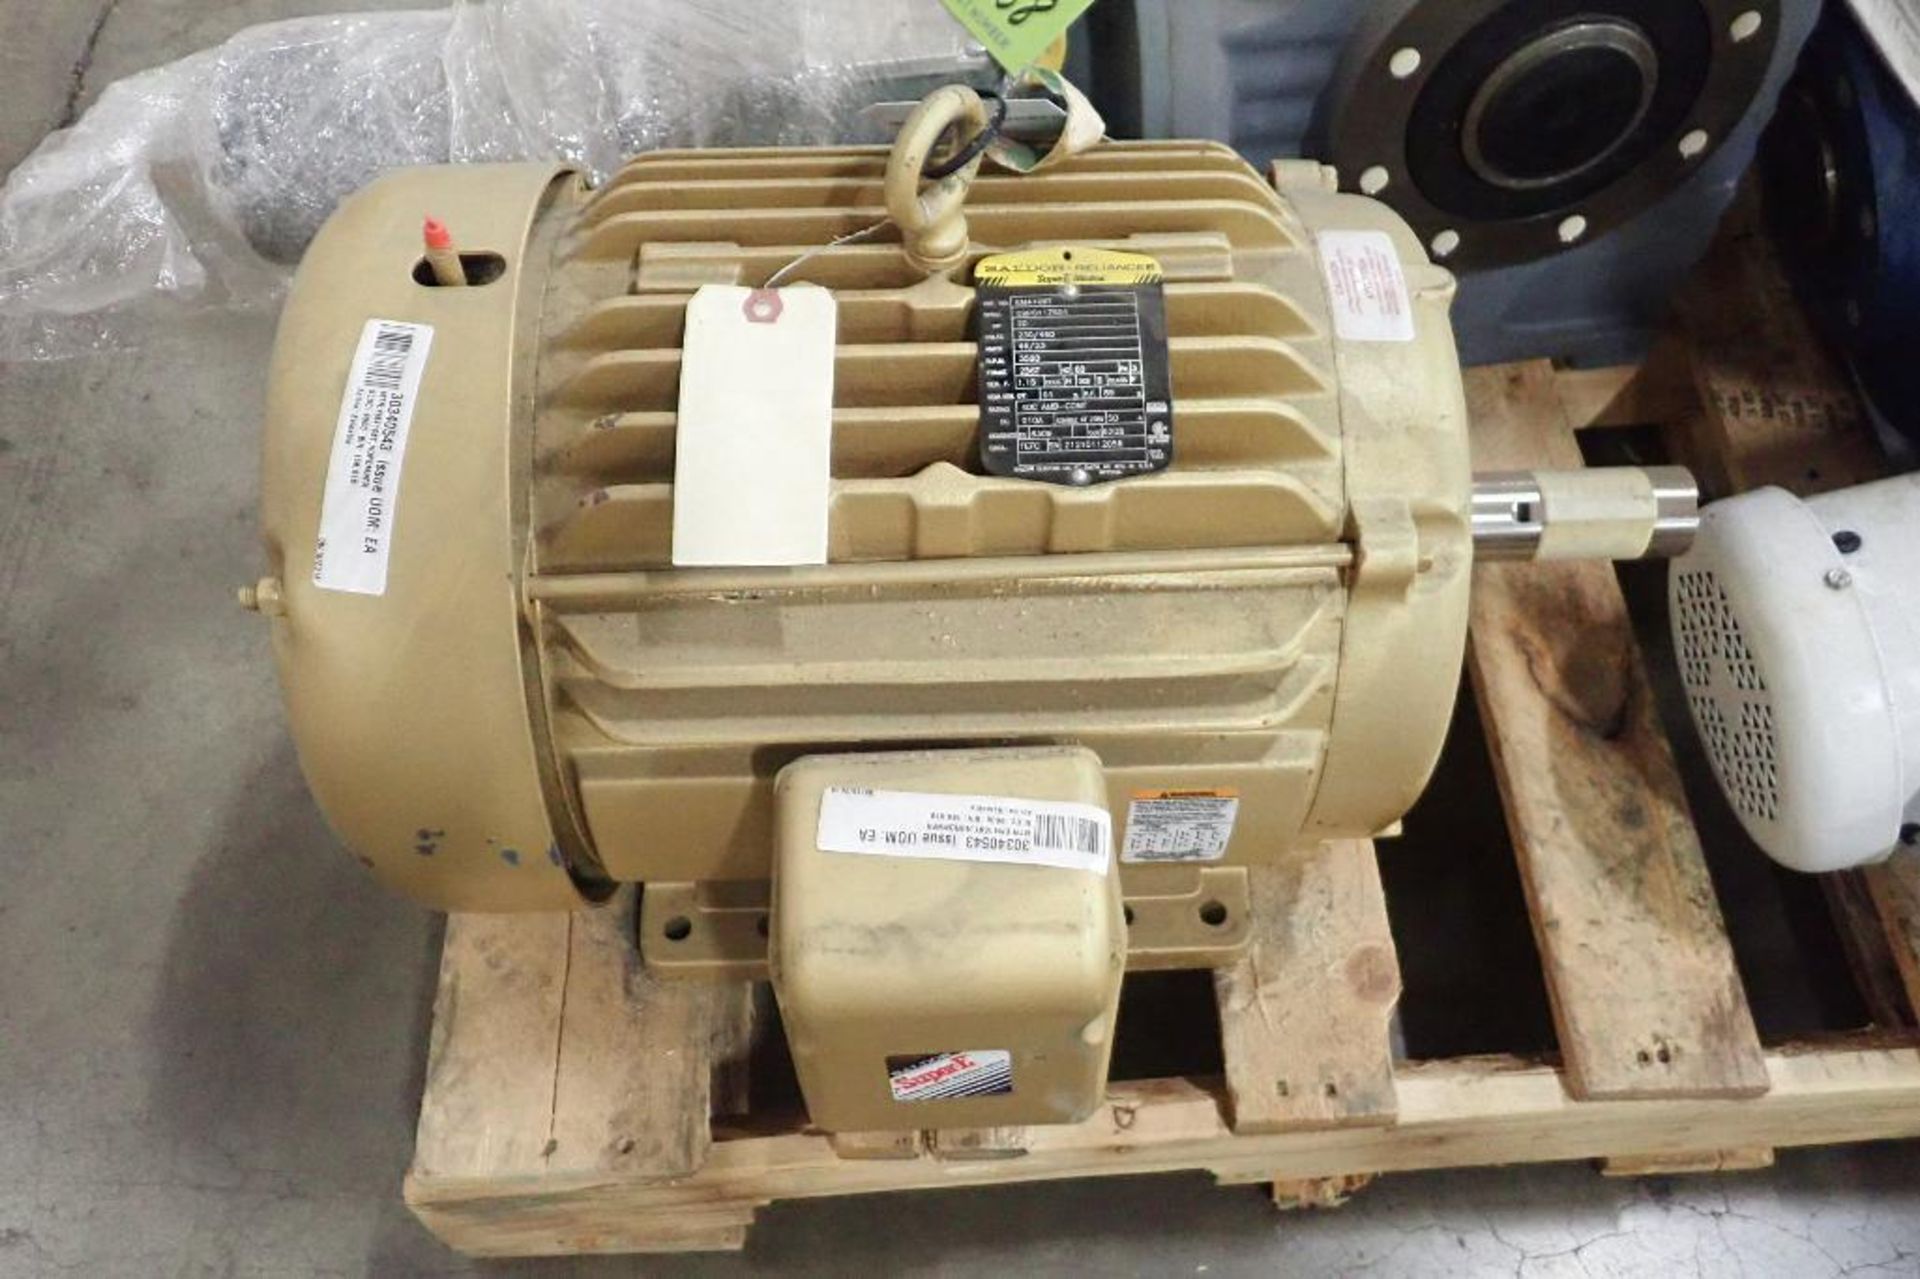 Baldor 20 hp electric motor. (See photos for additional specs). **Rigging Fee: $25** (Located in Eag